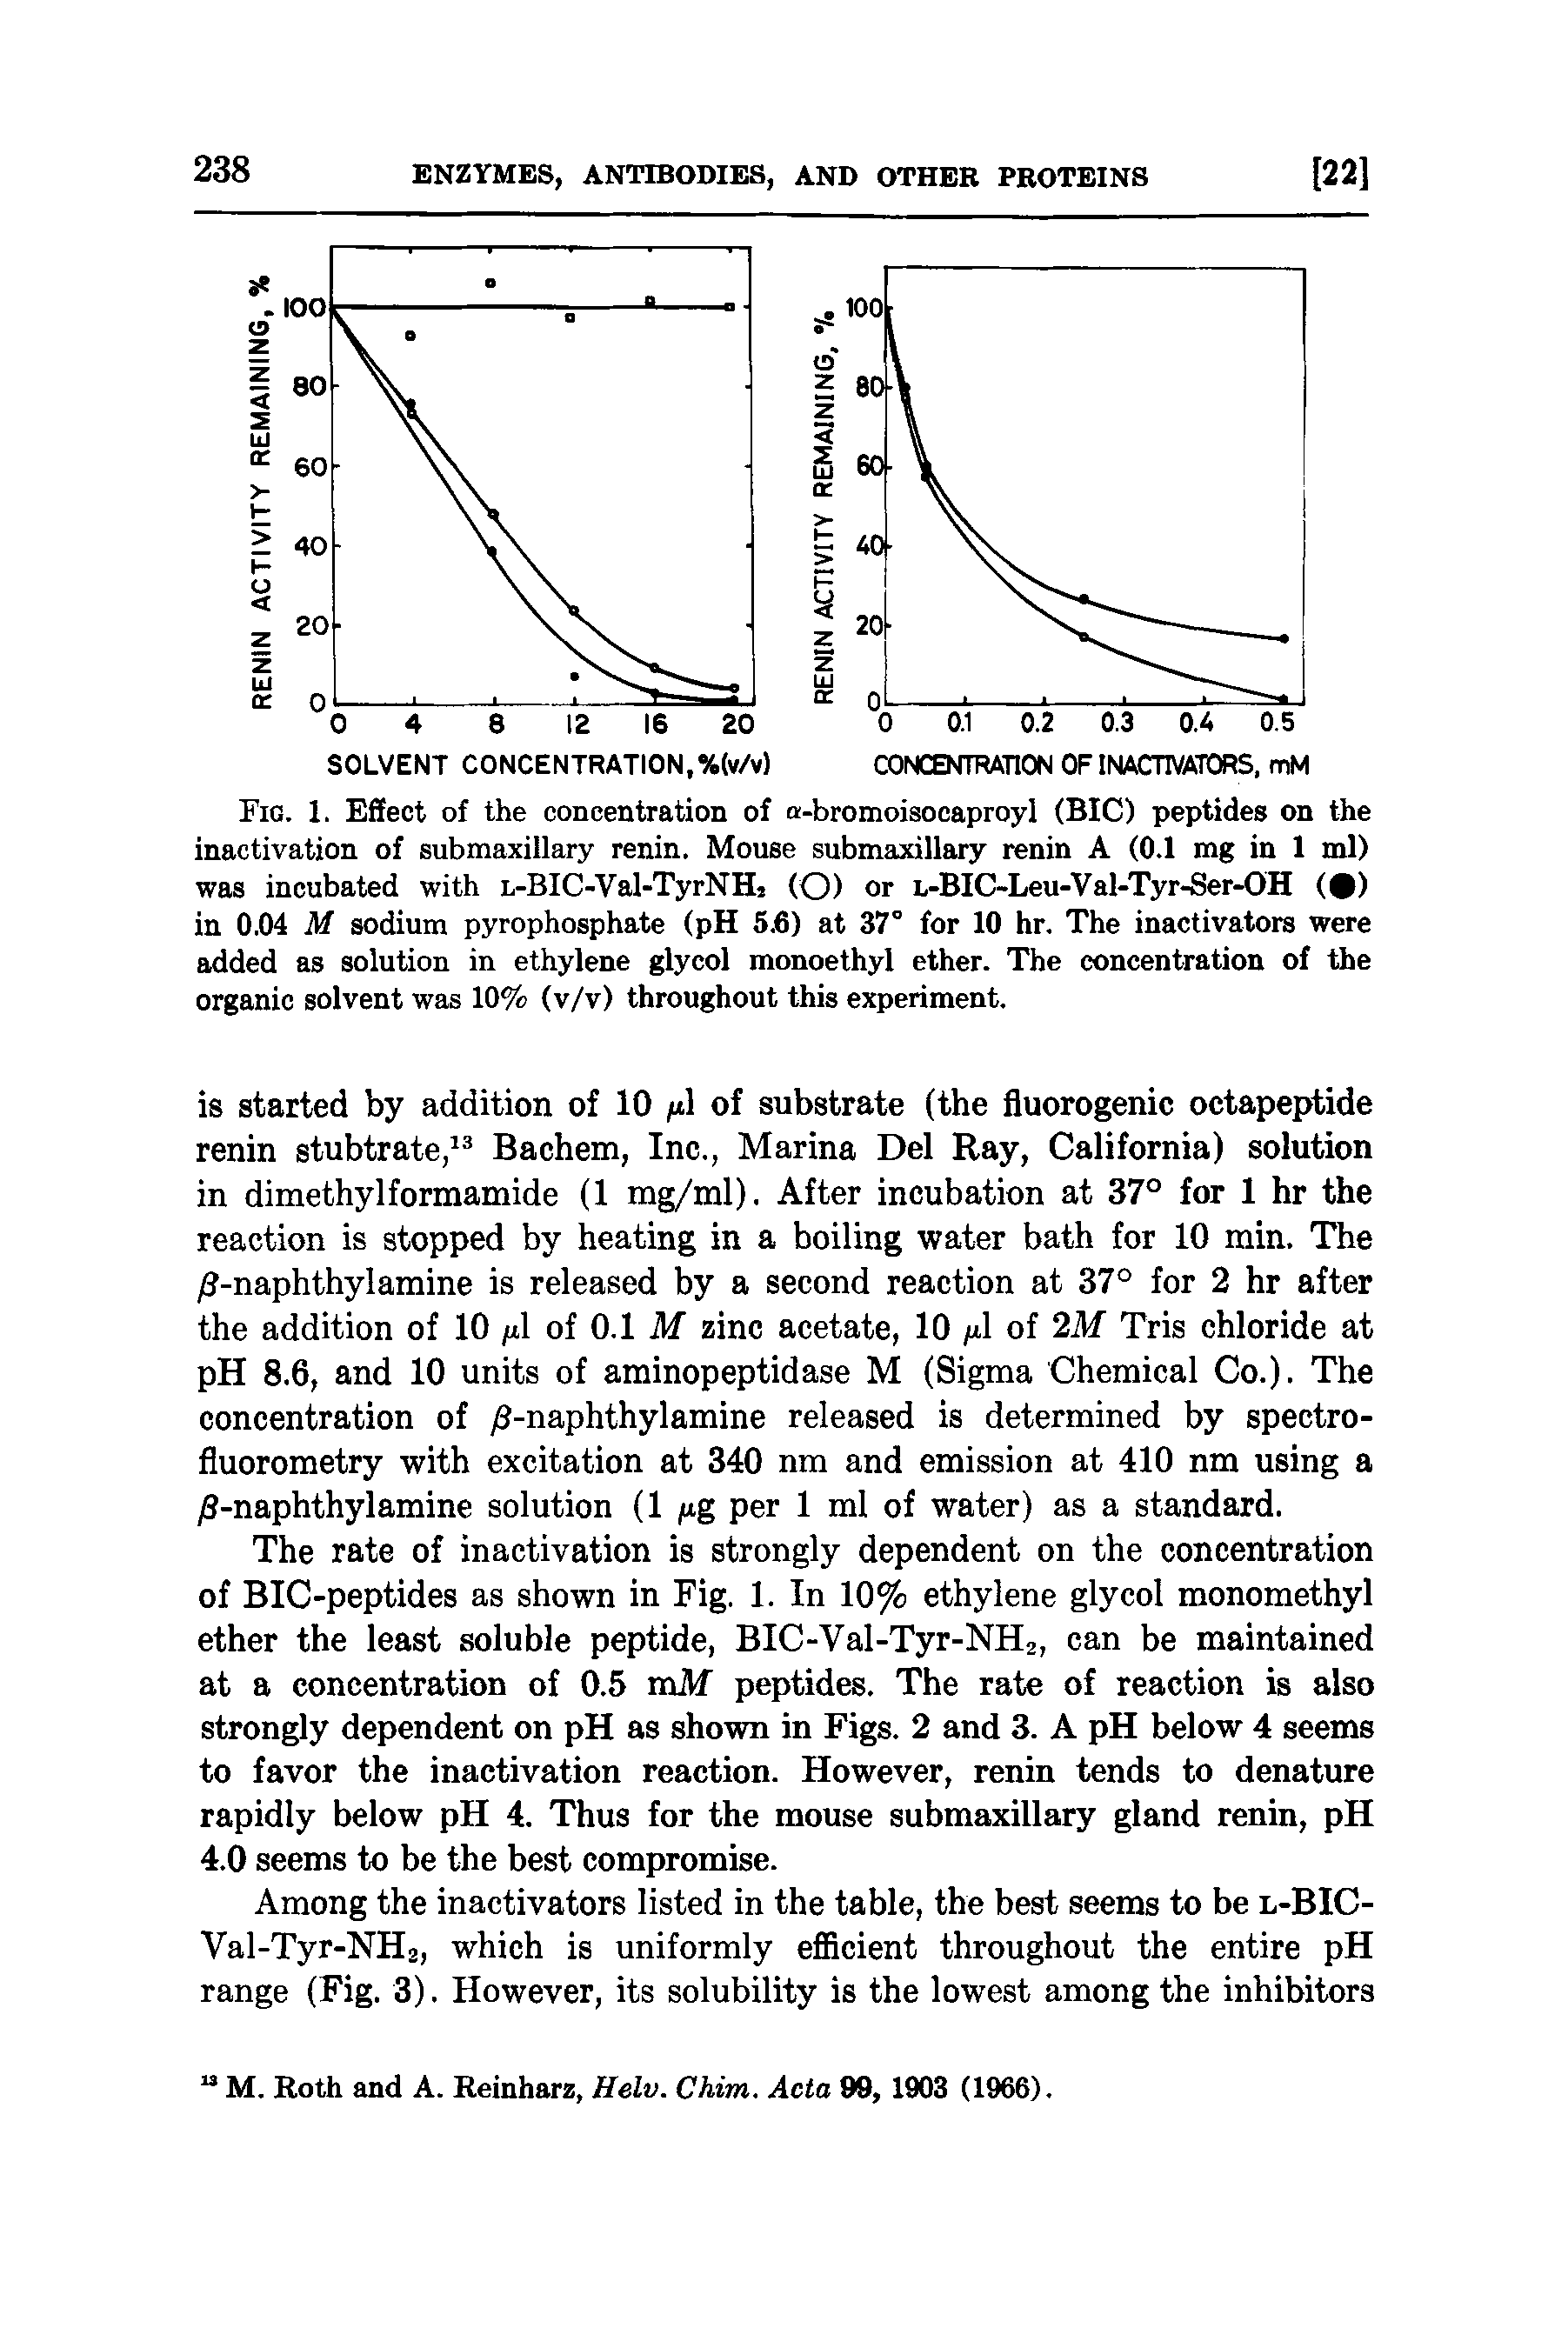 Fig. 1. Effect of the concentration of a-bromoisocaproyl (BIG) peptides on the inactivation of submaxillary renin. Mouse submaidllary renin A (0.1 mg in 1 ml) was incubated with t-BIC-Val-TyrNH, (O) or n-BIC-Leu-Val-Tyr-Ser-OH ( ) in 0.04 M sodium pyrophosphate (pH 5j6) at 37° for 10 hr. The inactivators were added as solution in ethylene glycol monoethyl ether. The concentration of the organic solvent was 10% (v/v) throughout this experiment.